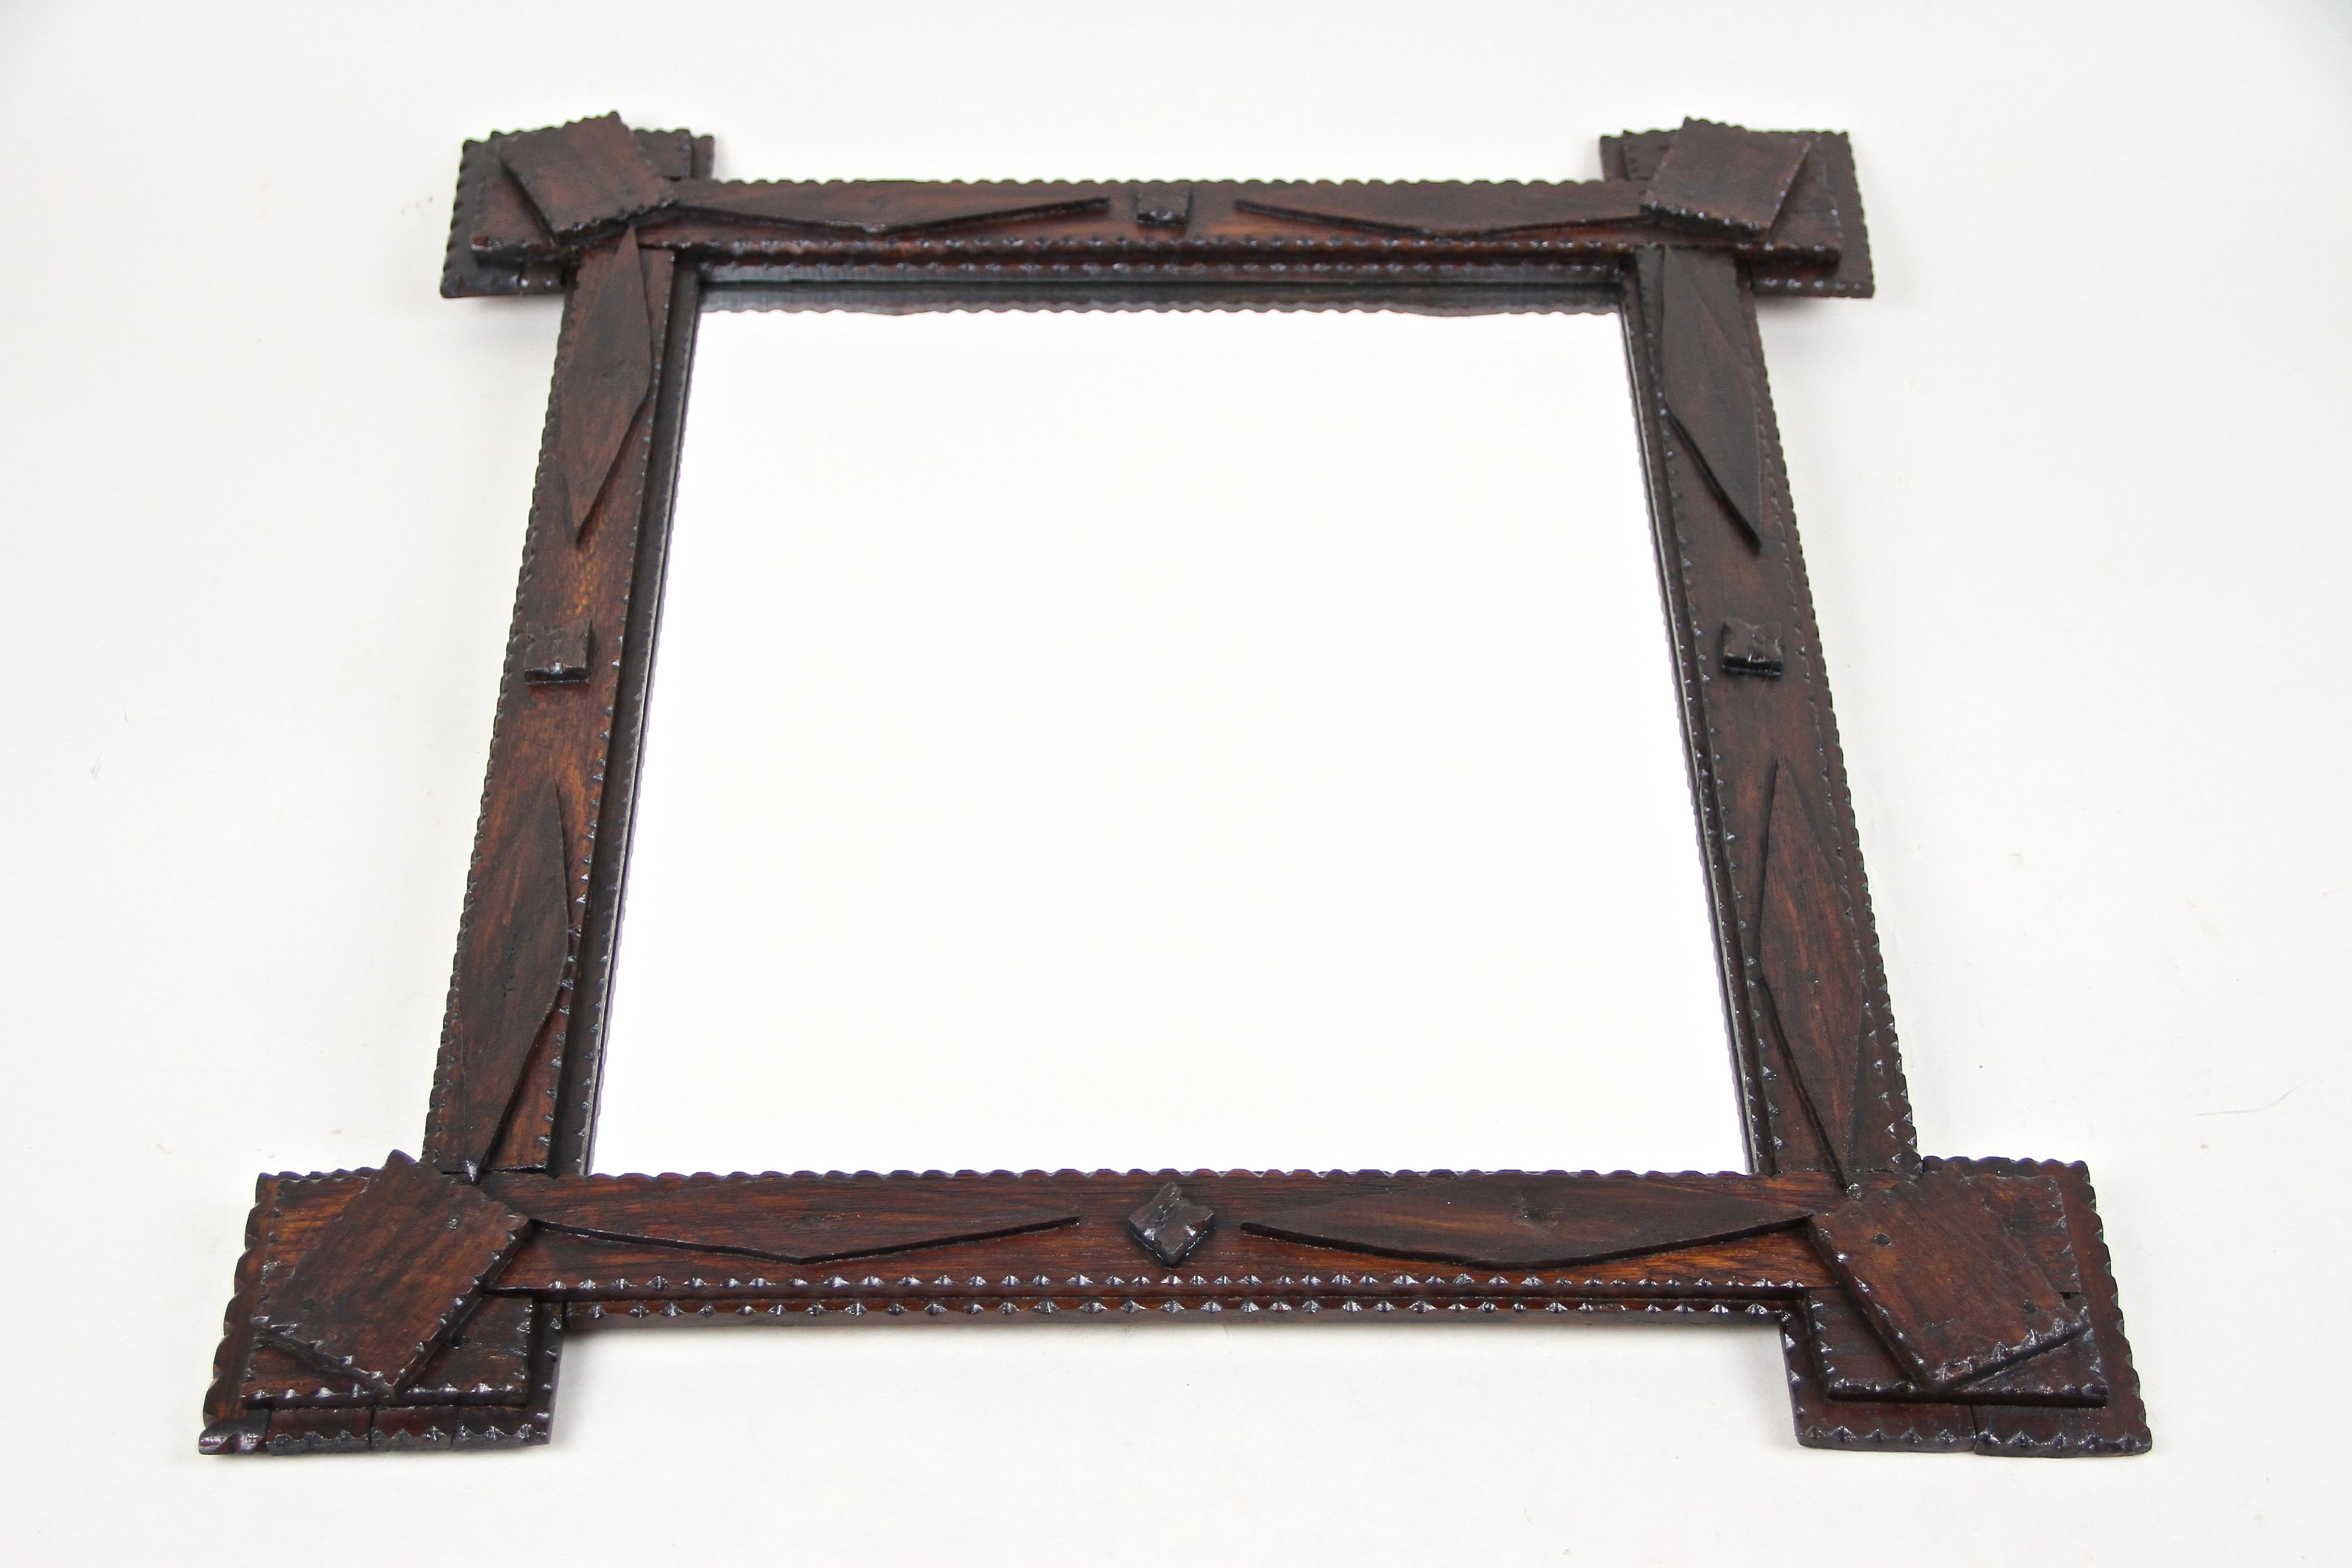 Rustic Tramp Art Wall Mirror with Extended Corners, Austria, circa 1870 For Sale 3